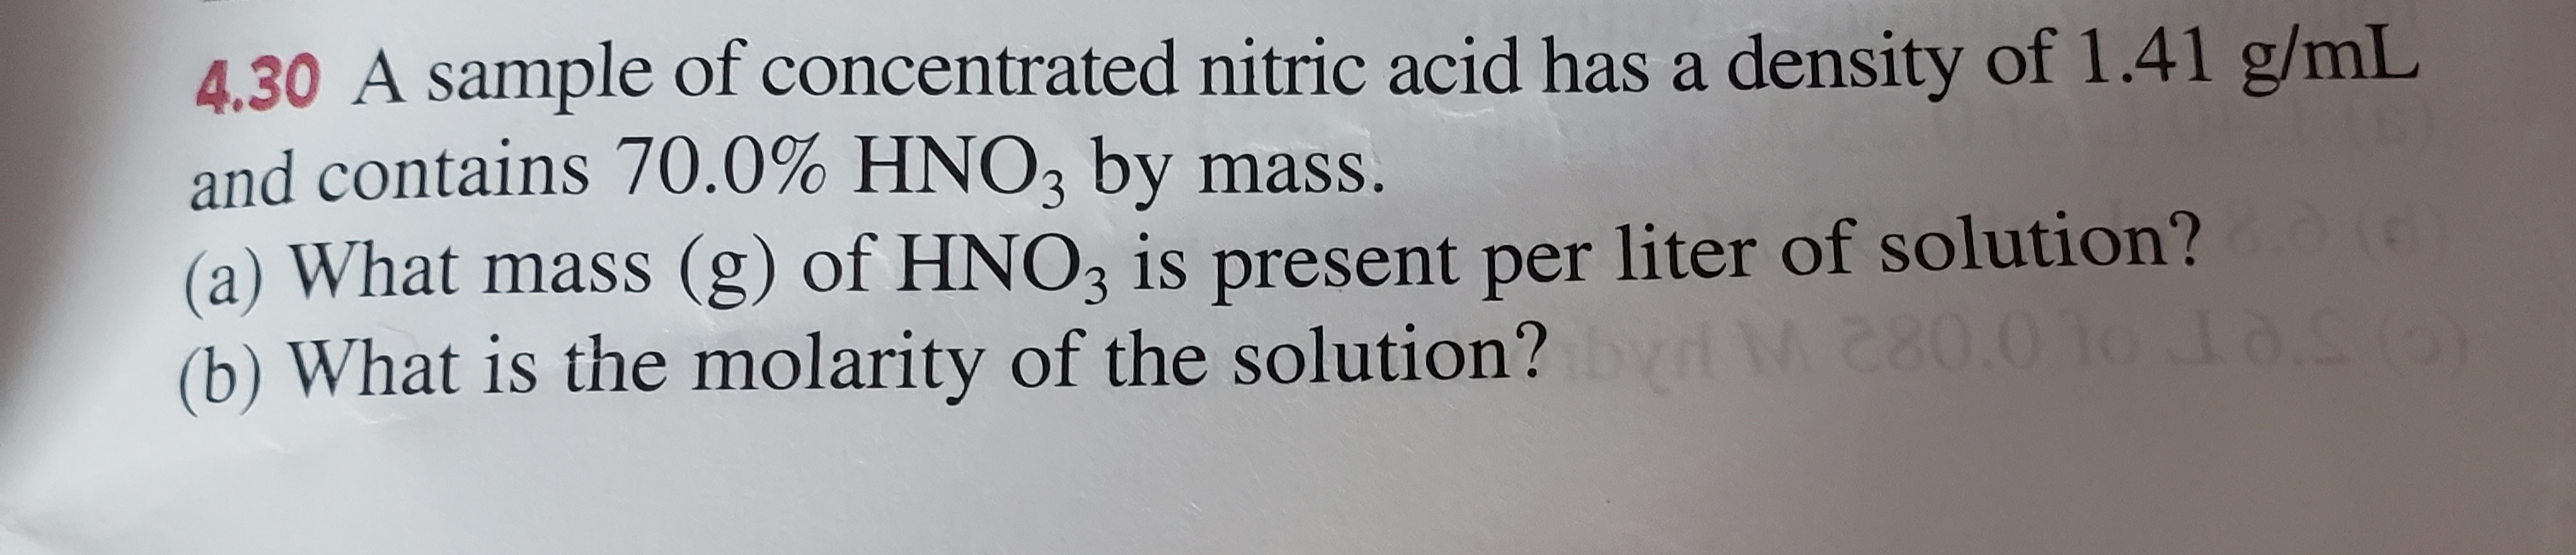 4.30 A sample of concentrated nitric acid has a density of 1.41 g/mL
and contains 70.0% HNO3 by mass.
(a) What mass (g) of HNO3 is present per liter of solution?
(b) What is the molarity of the solution?
M.80.010 8.S (0)
